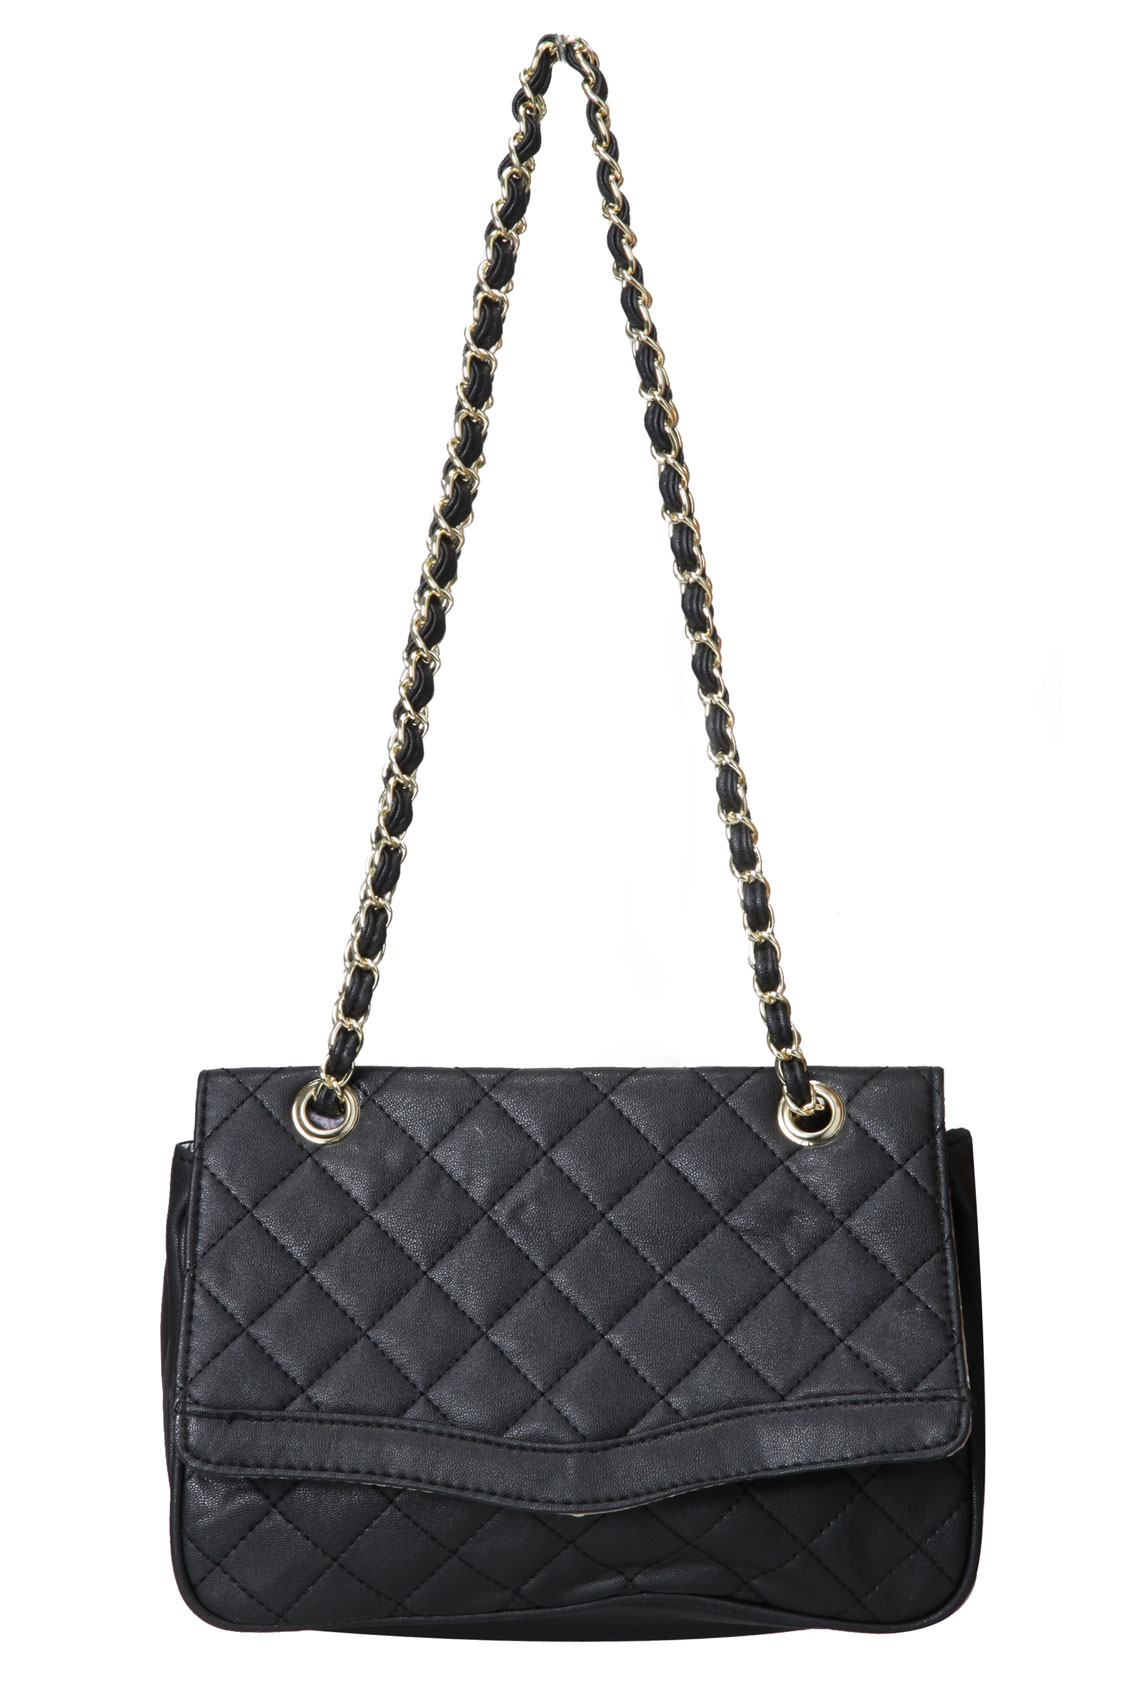 Black quilted bag with gold chain